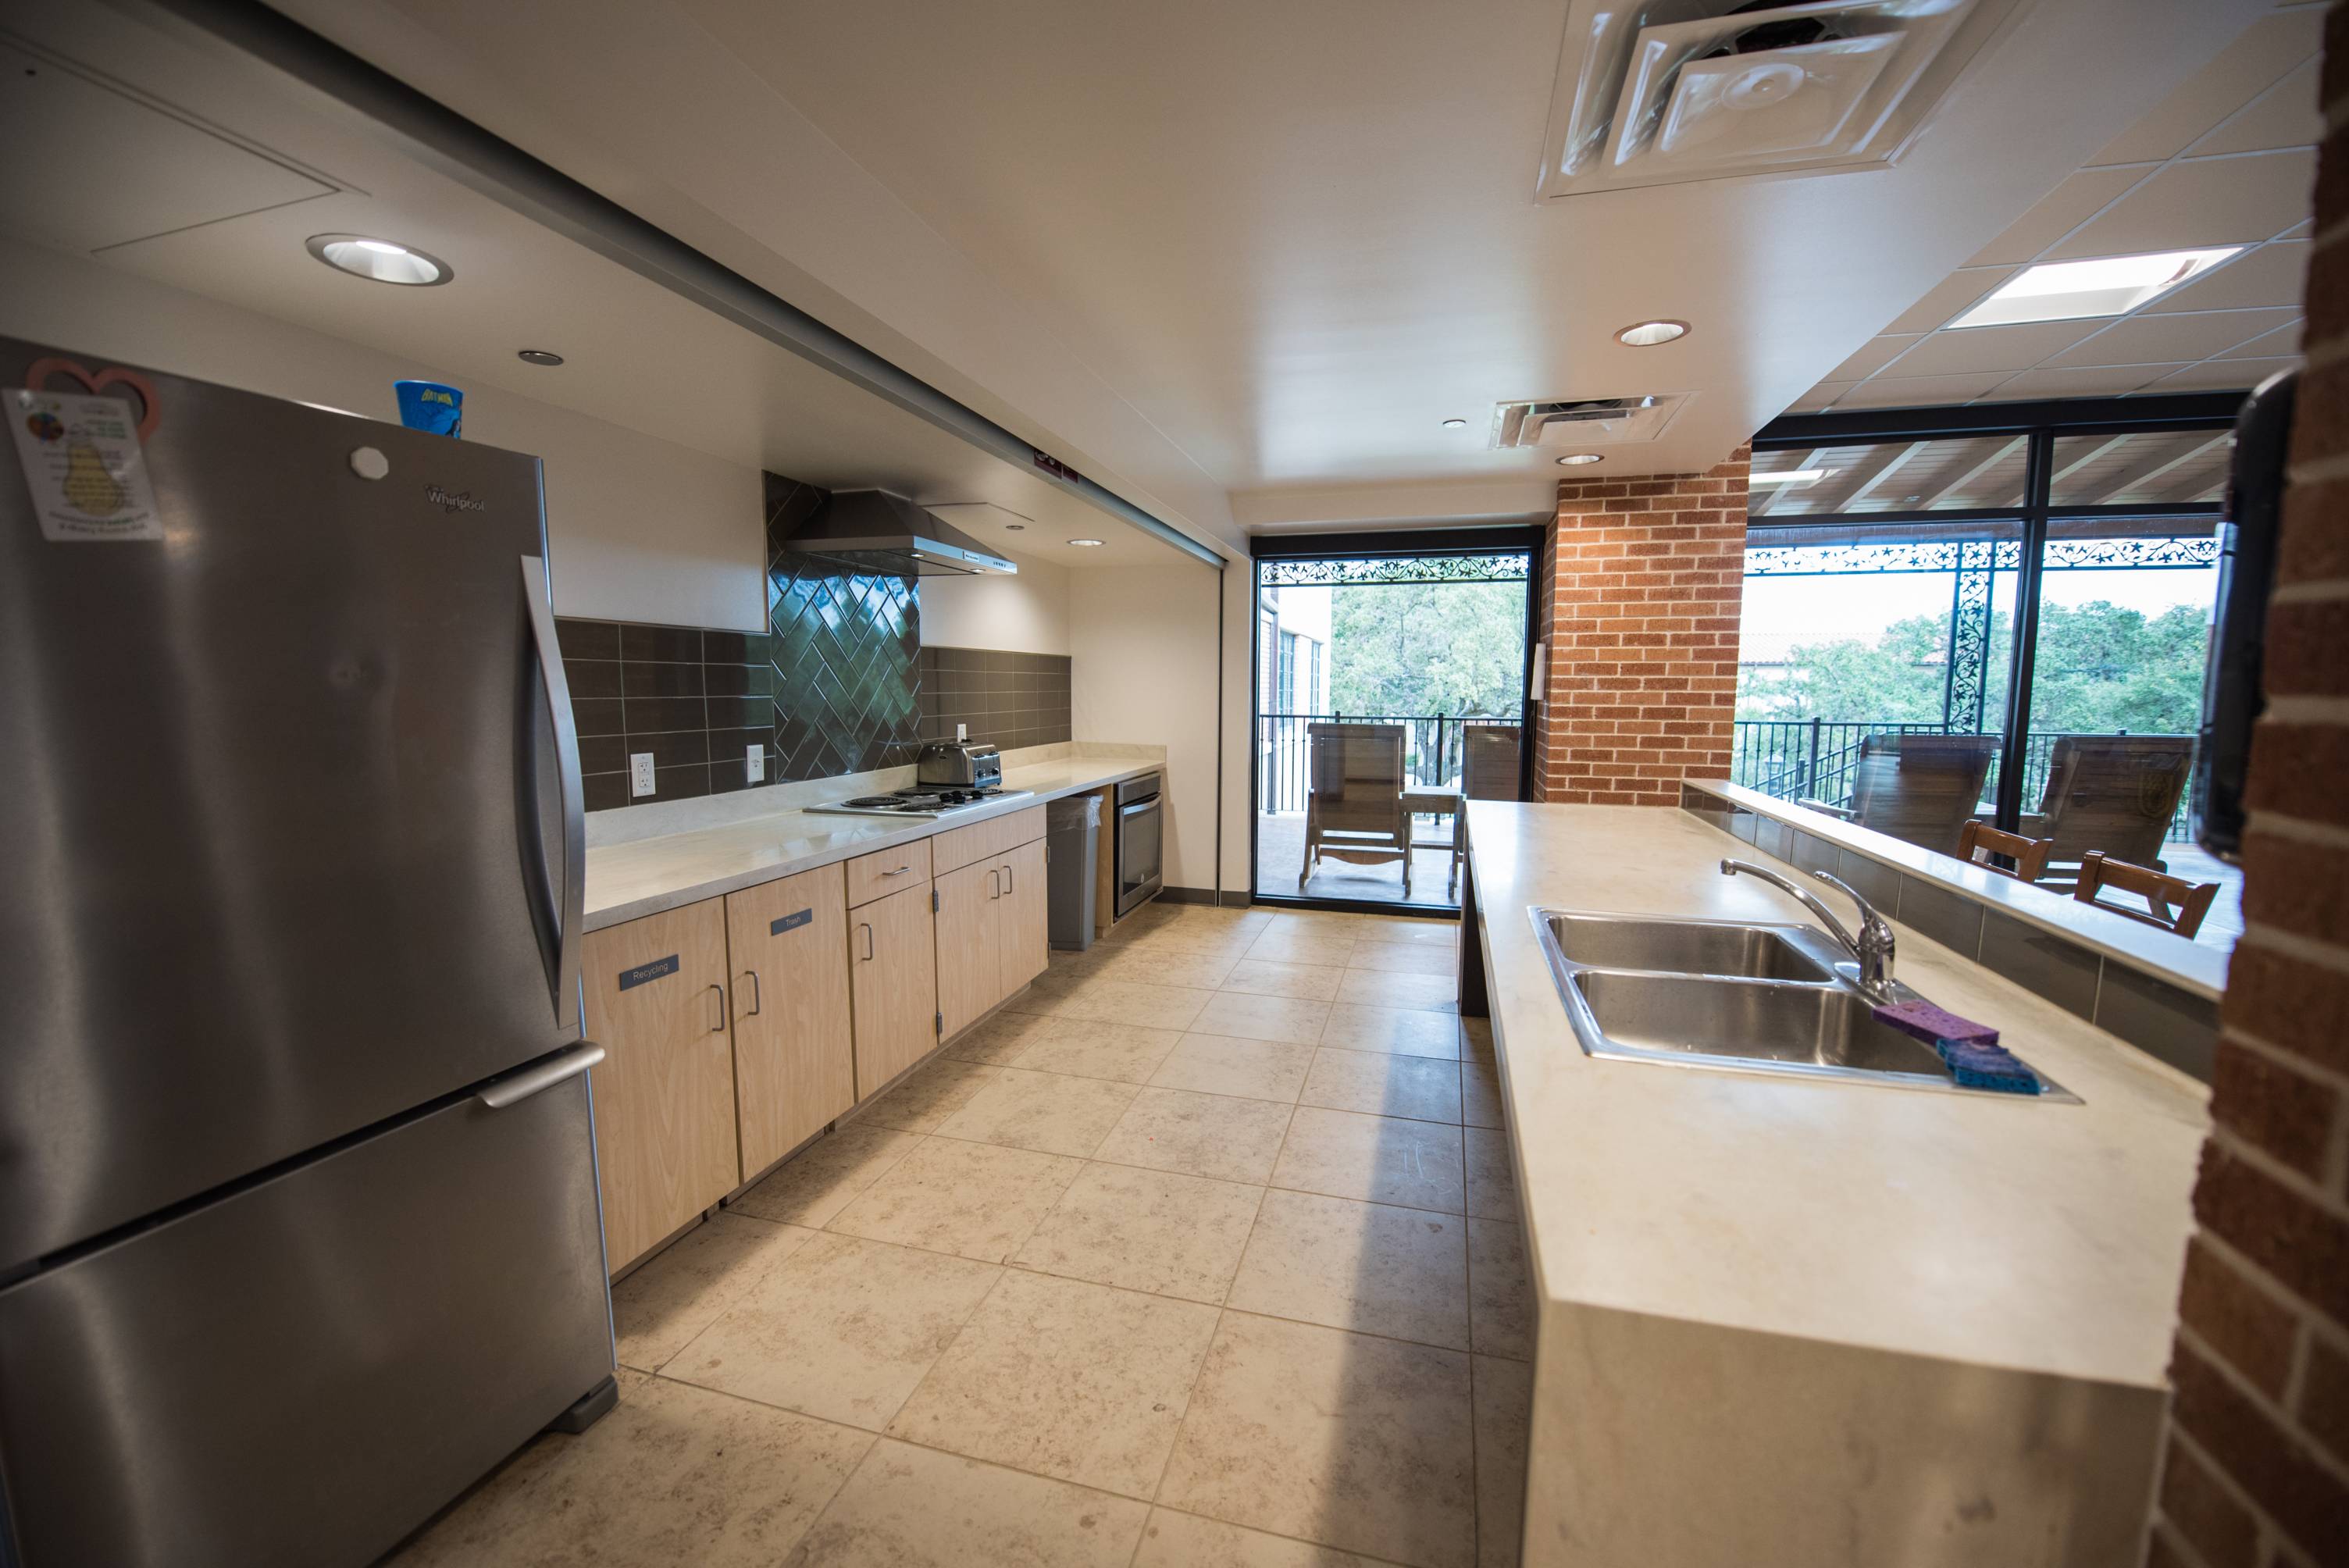 Kitchen space within residential hall on campus